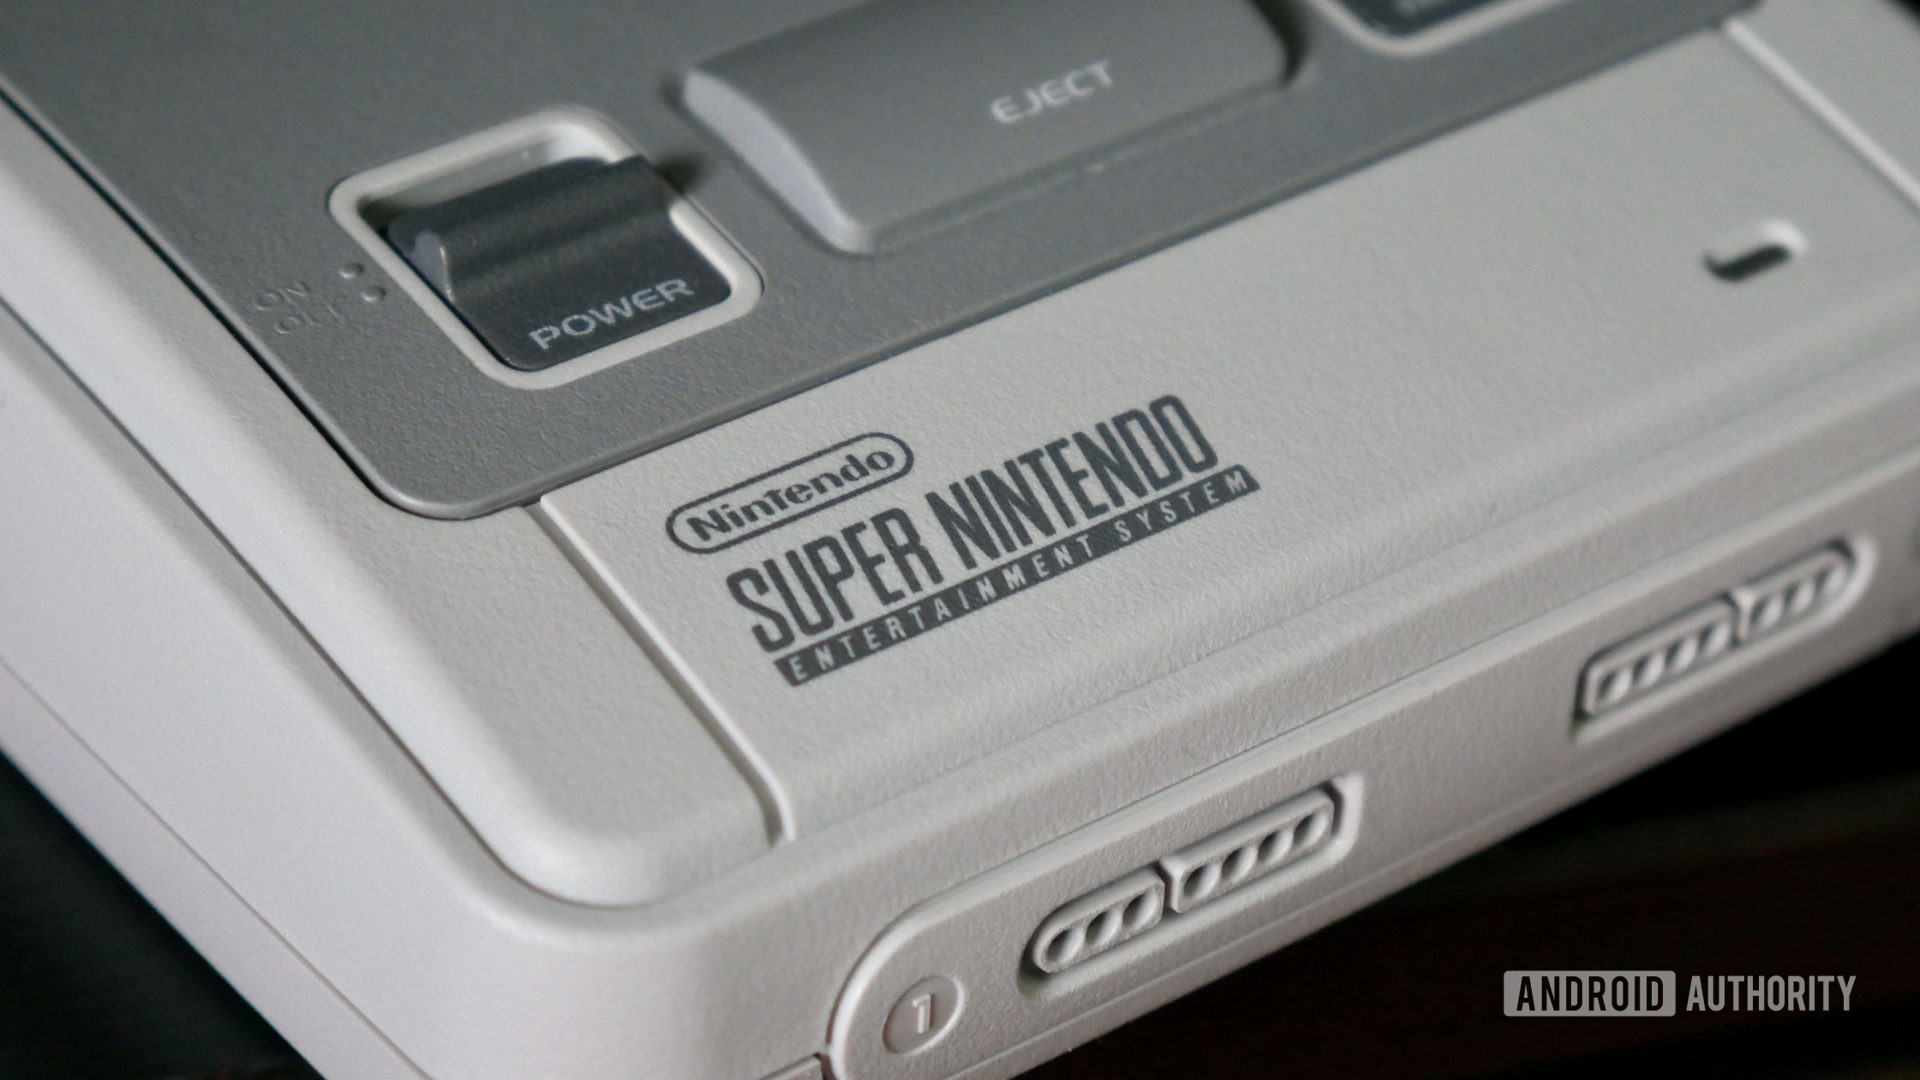 The SNES Console showing the Super Nintendo logo.